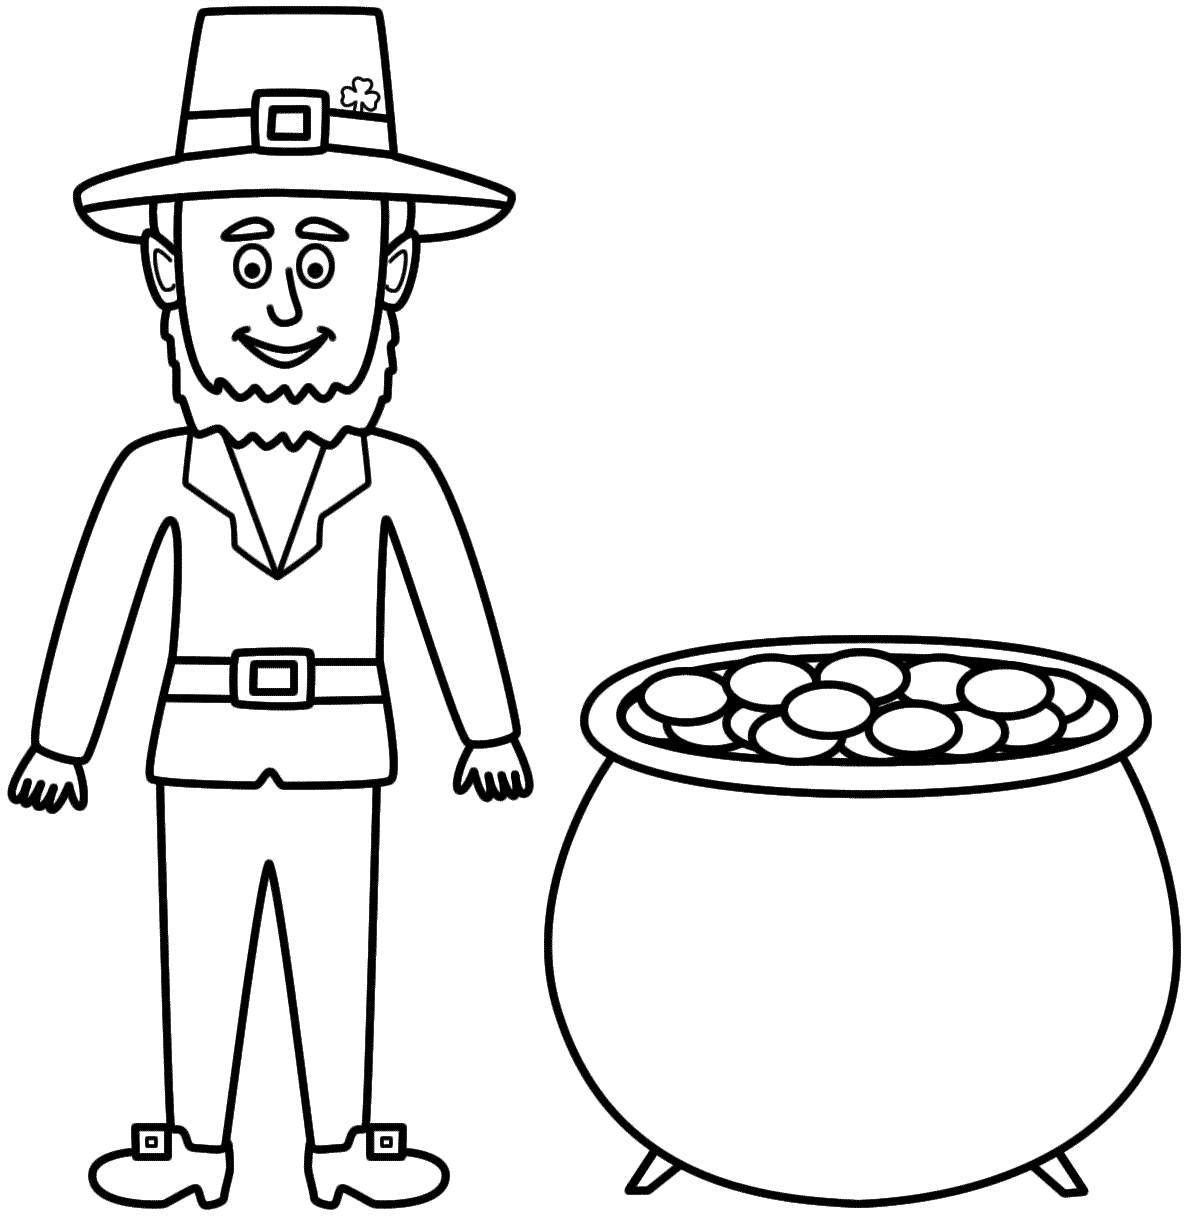 Pot of gold coloring page - Coloring Pages & Pictures - IMAGIXS